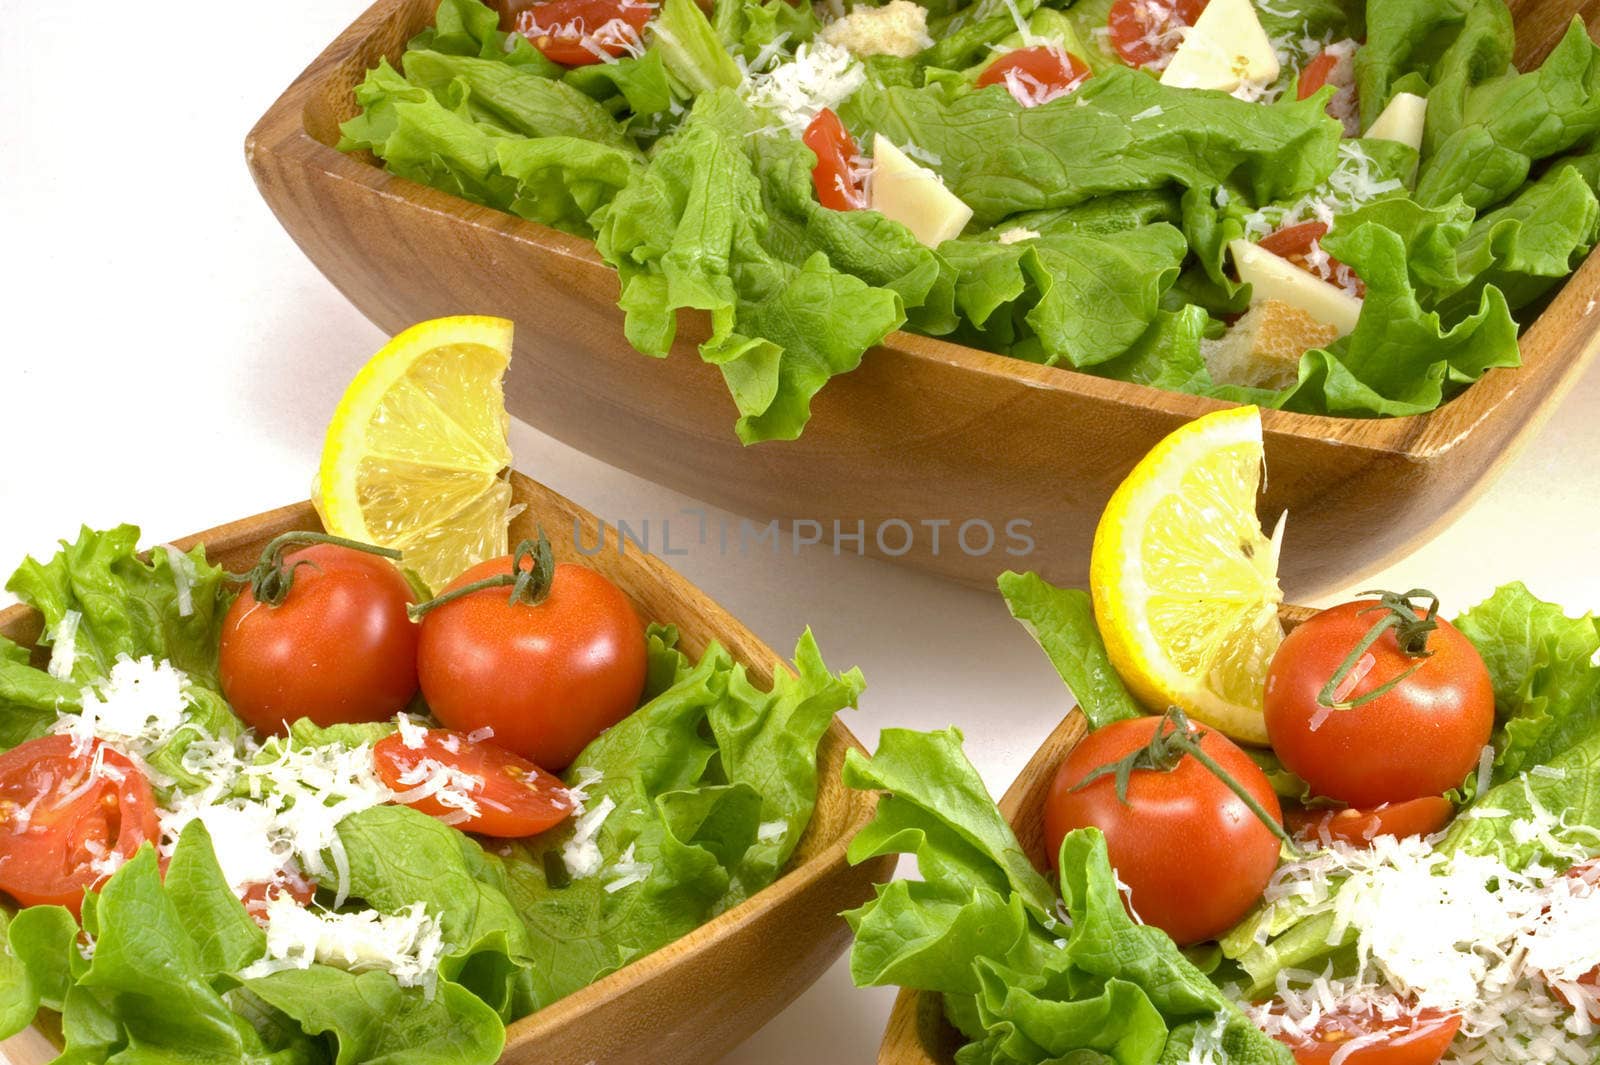 Salad in Wooden Bowls by mothy20